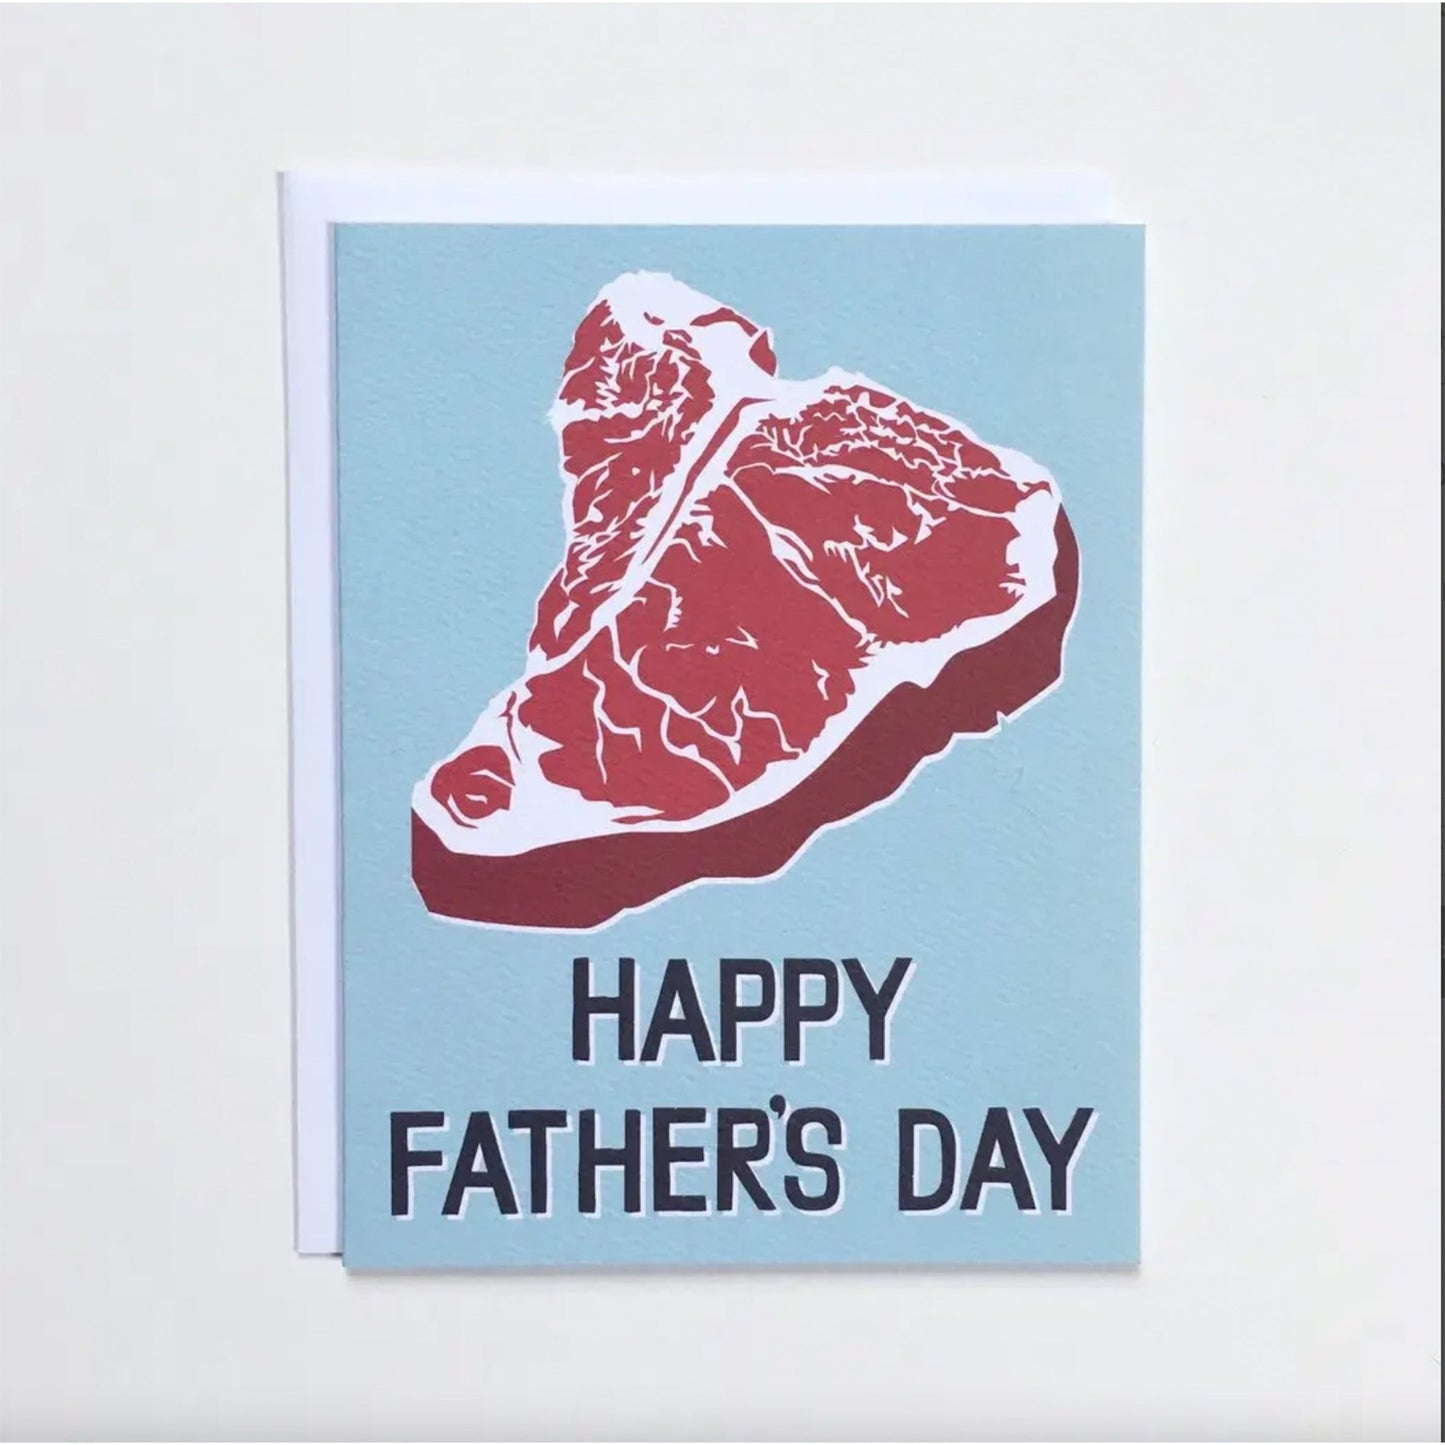 Happy Father's Day With A T Bone Steak | BANQUET WORKSHOP - Muse + Moonstone